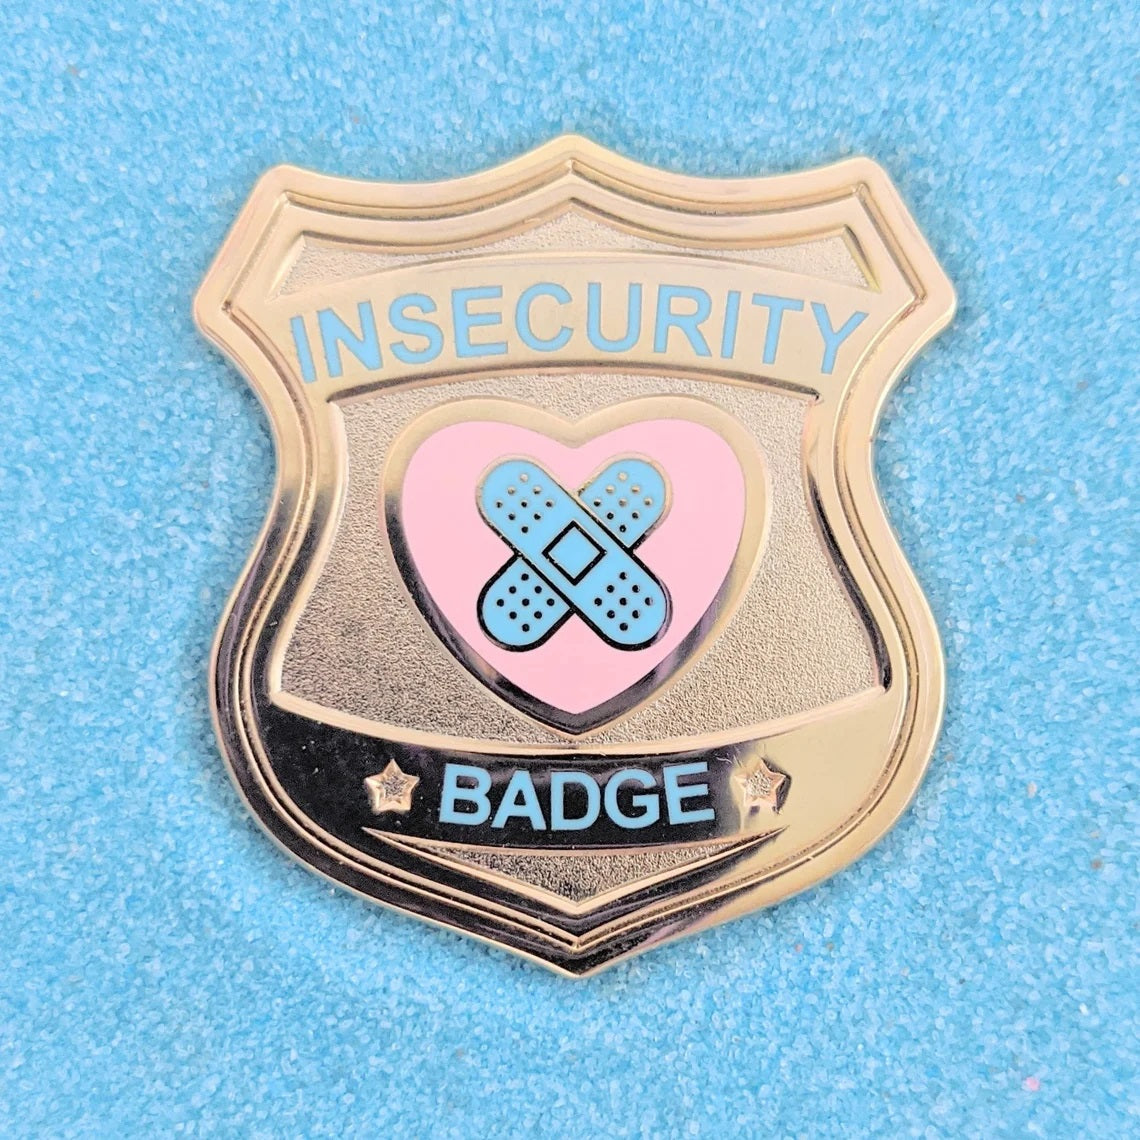 insecurity badge pin